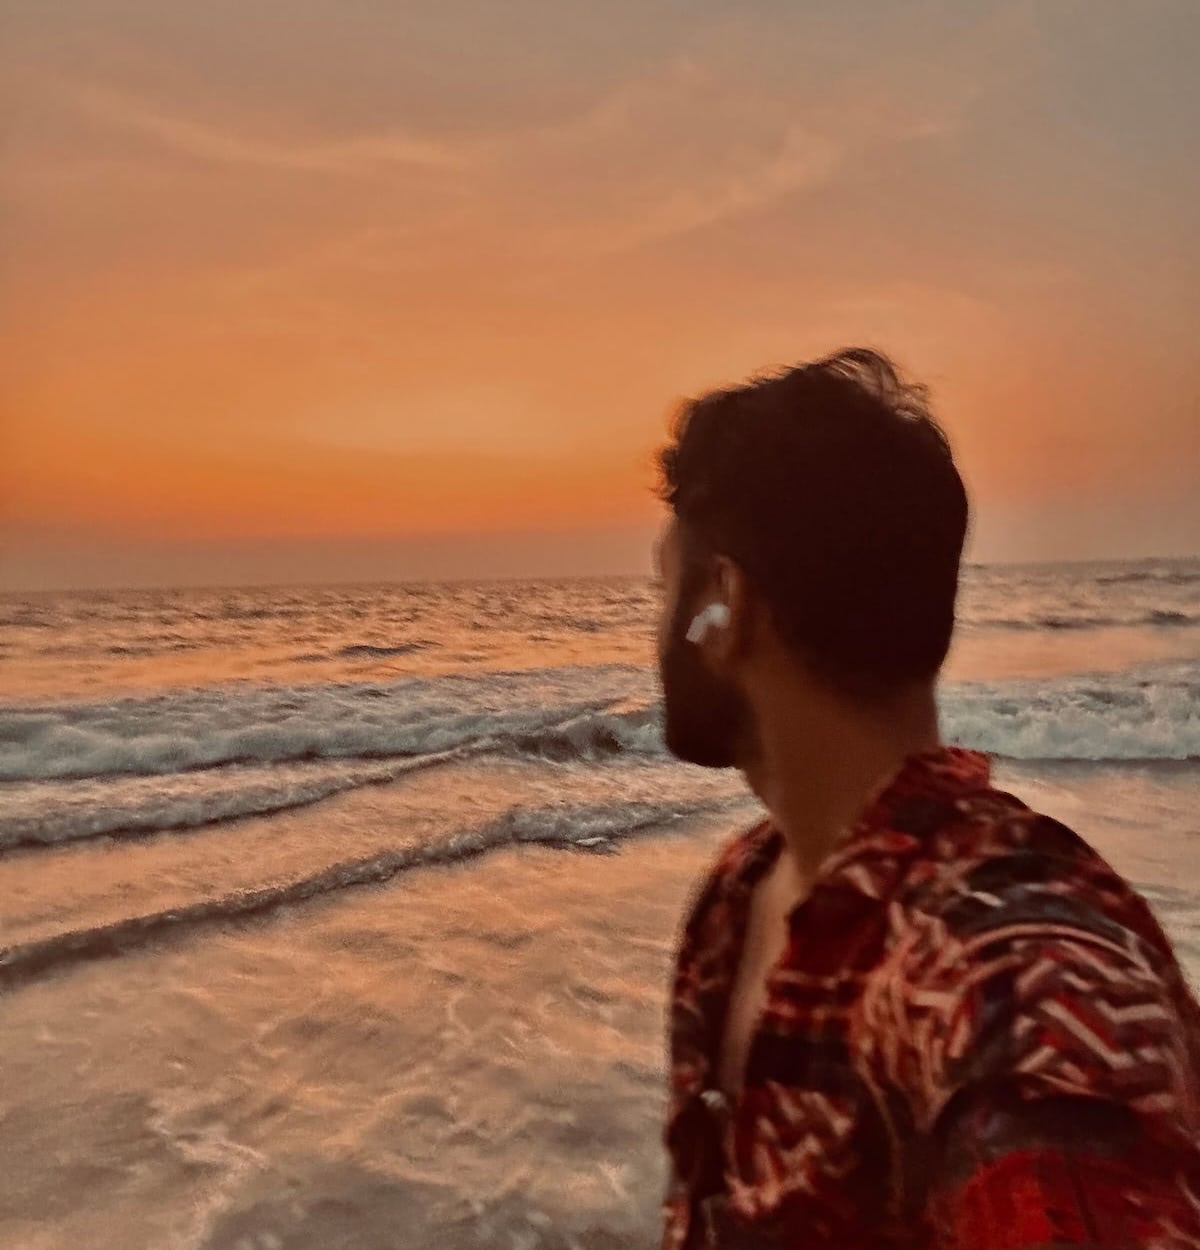 Rishi on a beach in Goa doing what he loves, watching sunset